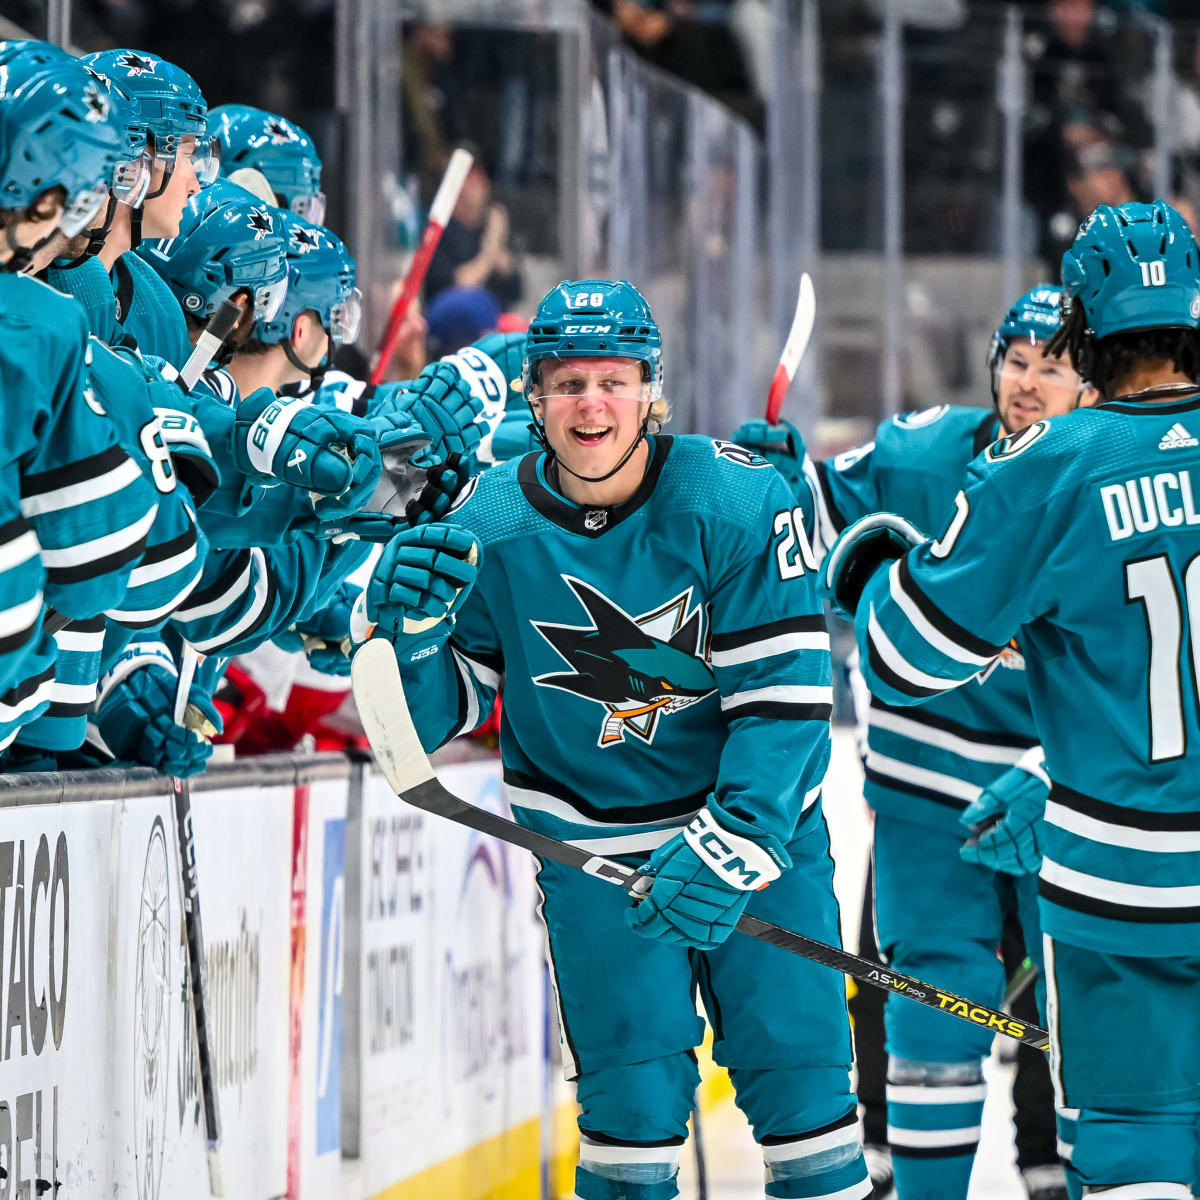 Seth Jarvis scores 2 power-play goals, Hurricanes beat Sharks 6-3